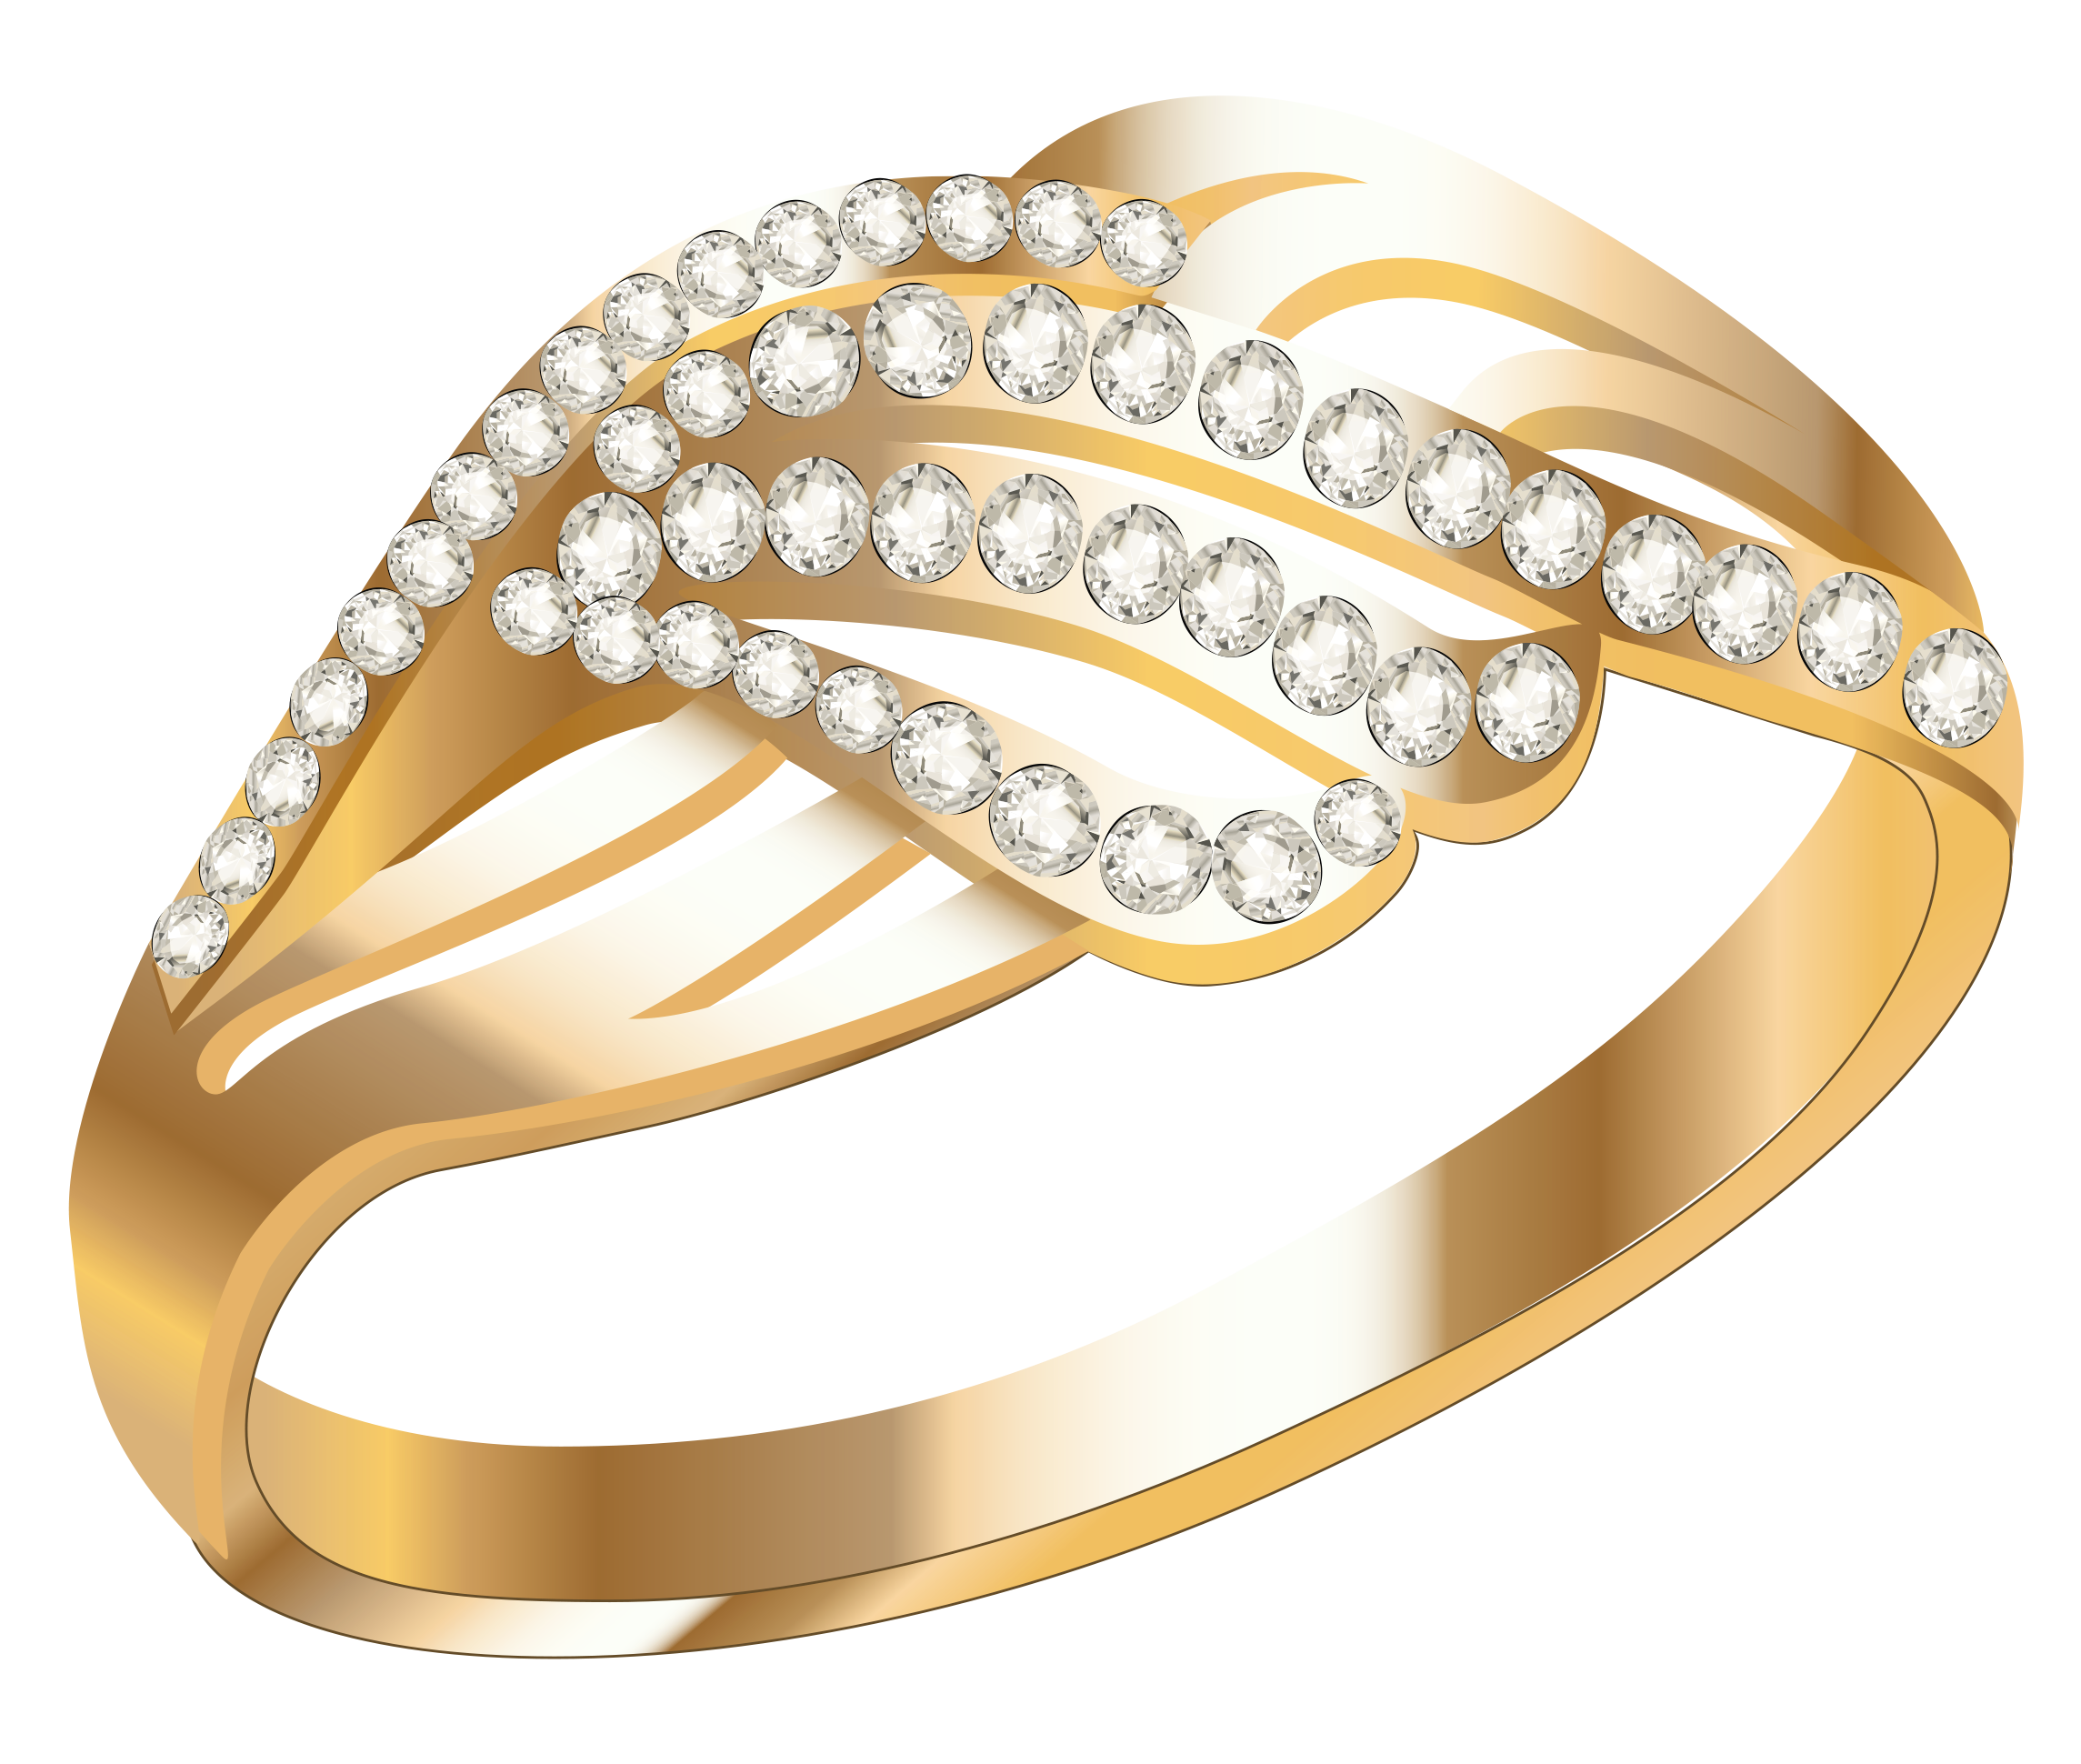 Jewellery Ring PNG Image Transparent